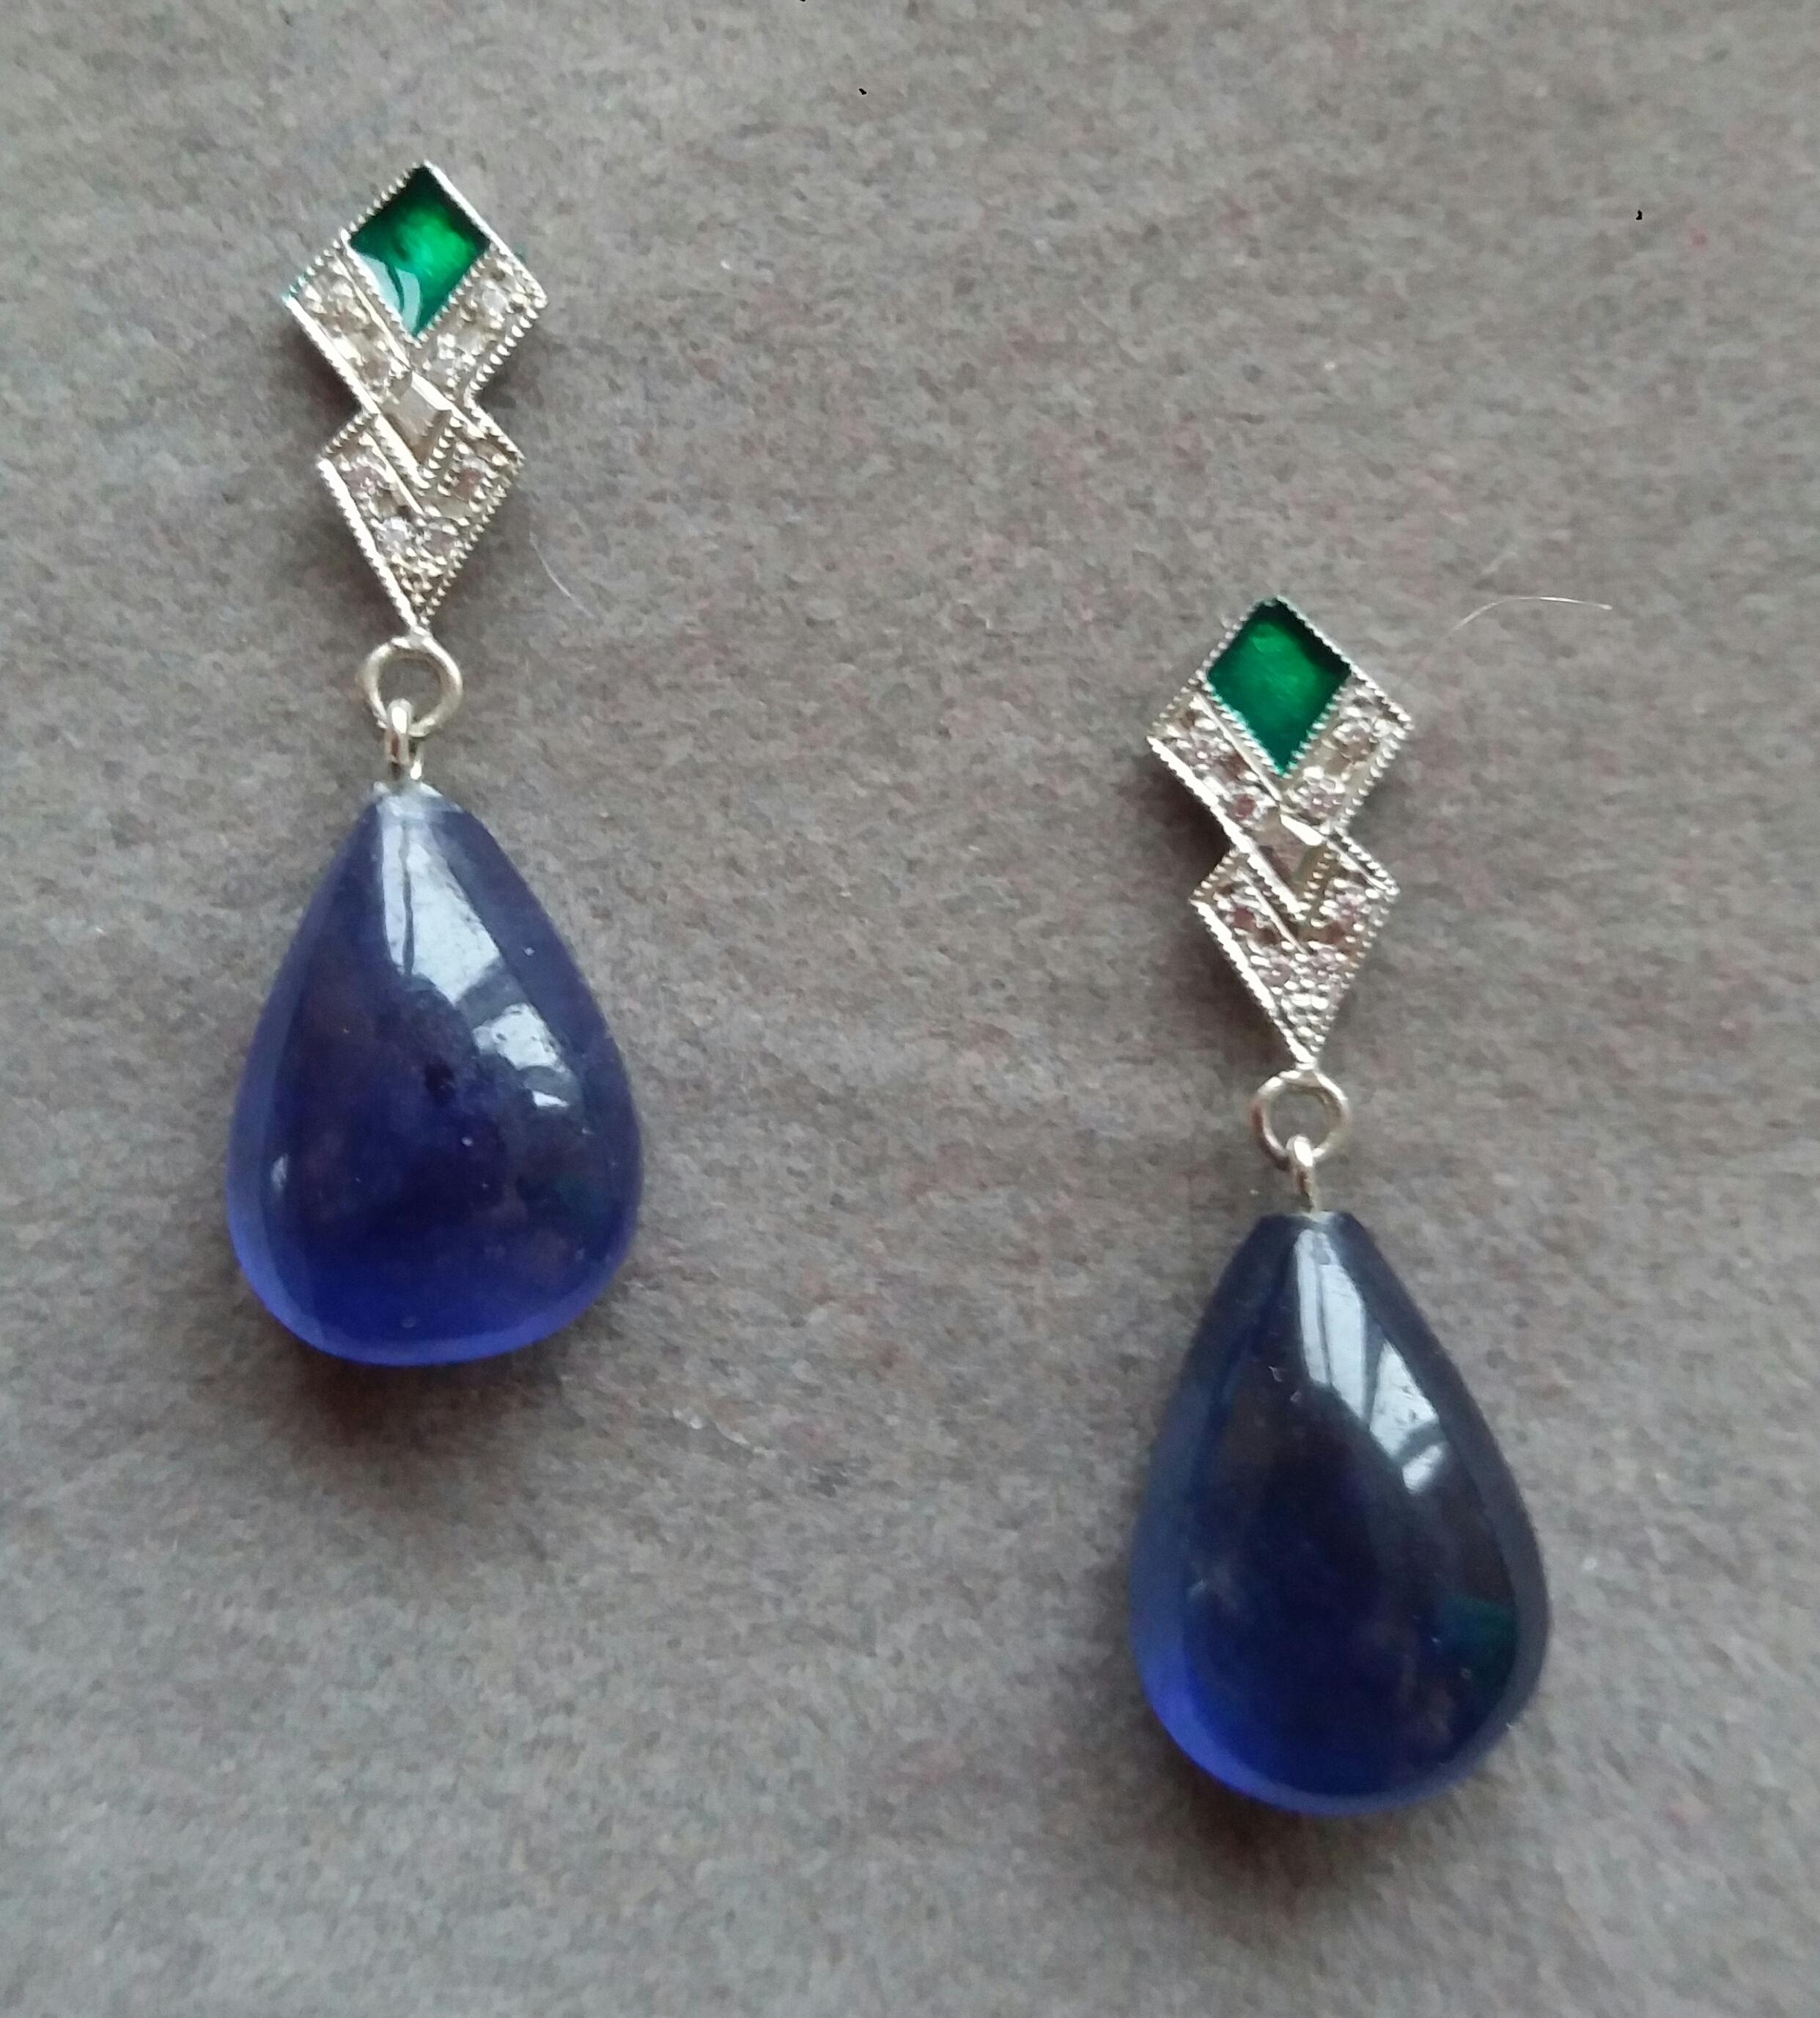 In these classic Art Deco Style earrings the tops are 2 elements  in 14 kt. white gold, 16 round full cut diamonds and Green Enamel,,in the lower parts we have 2 big size Pear Shape Blue Sapphire Cabs  measuring 11 x 15 mm and weighing 22 carats

In